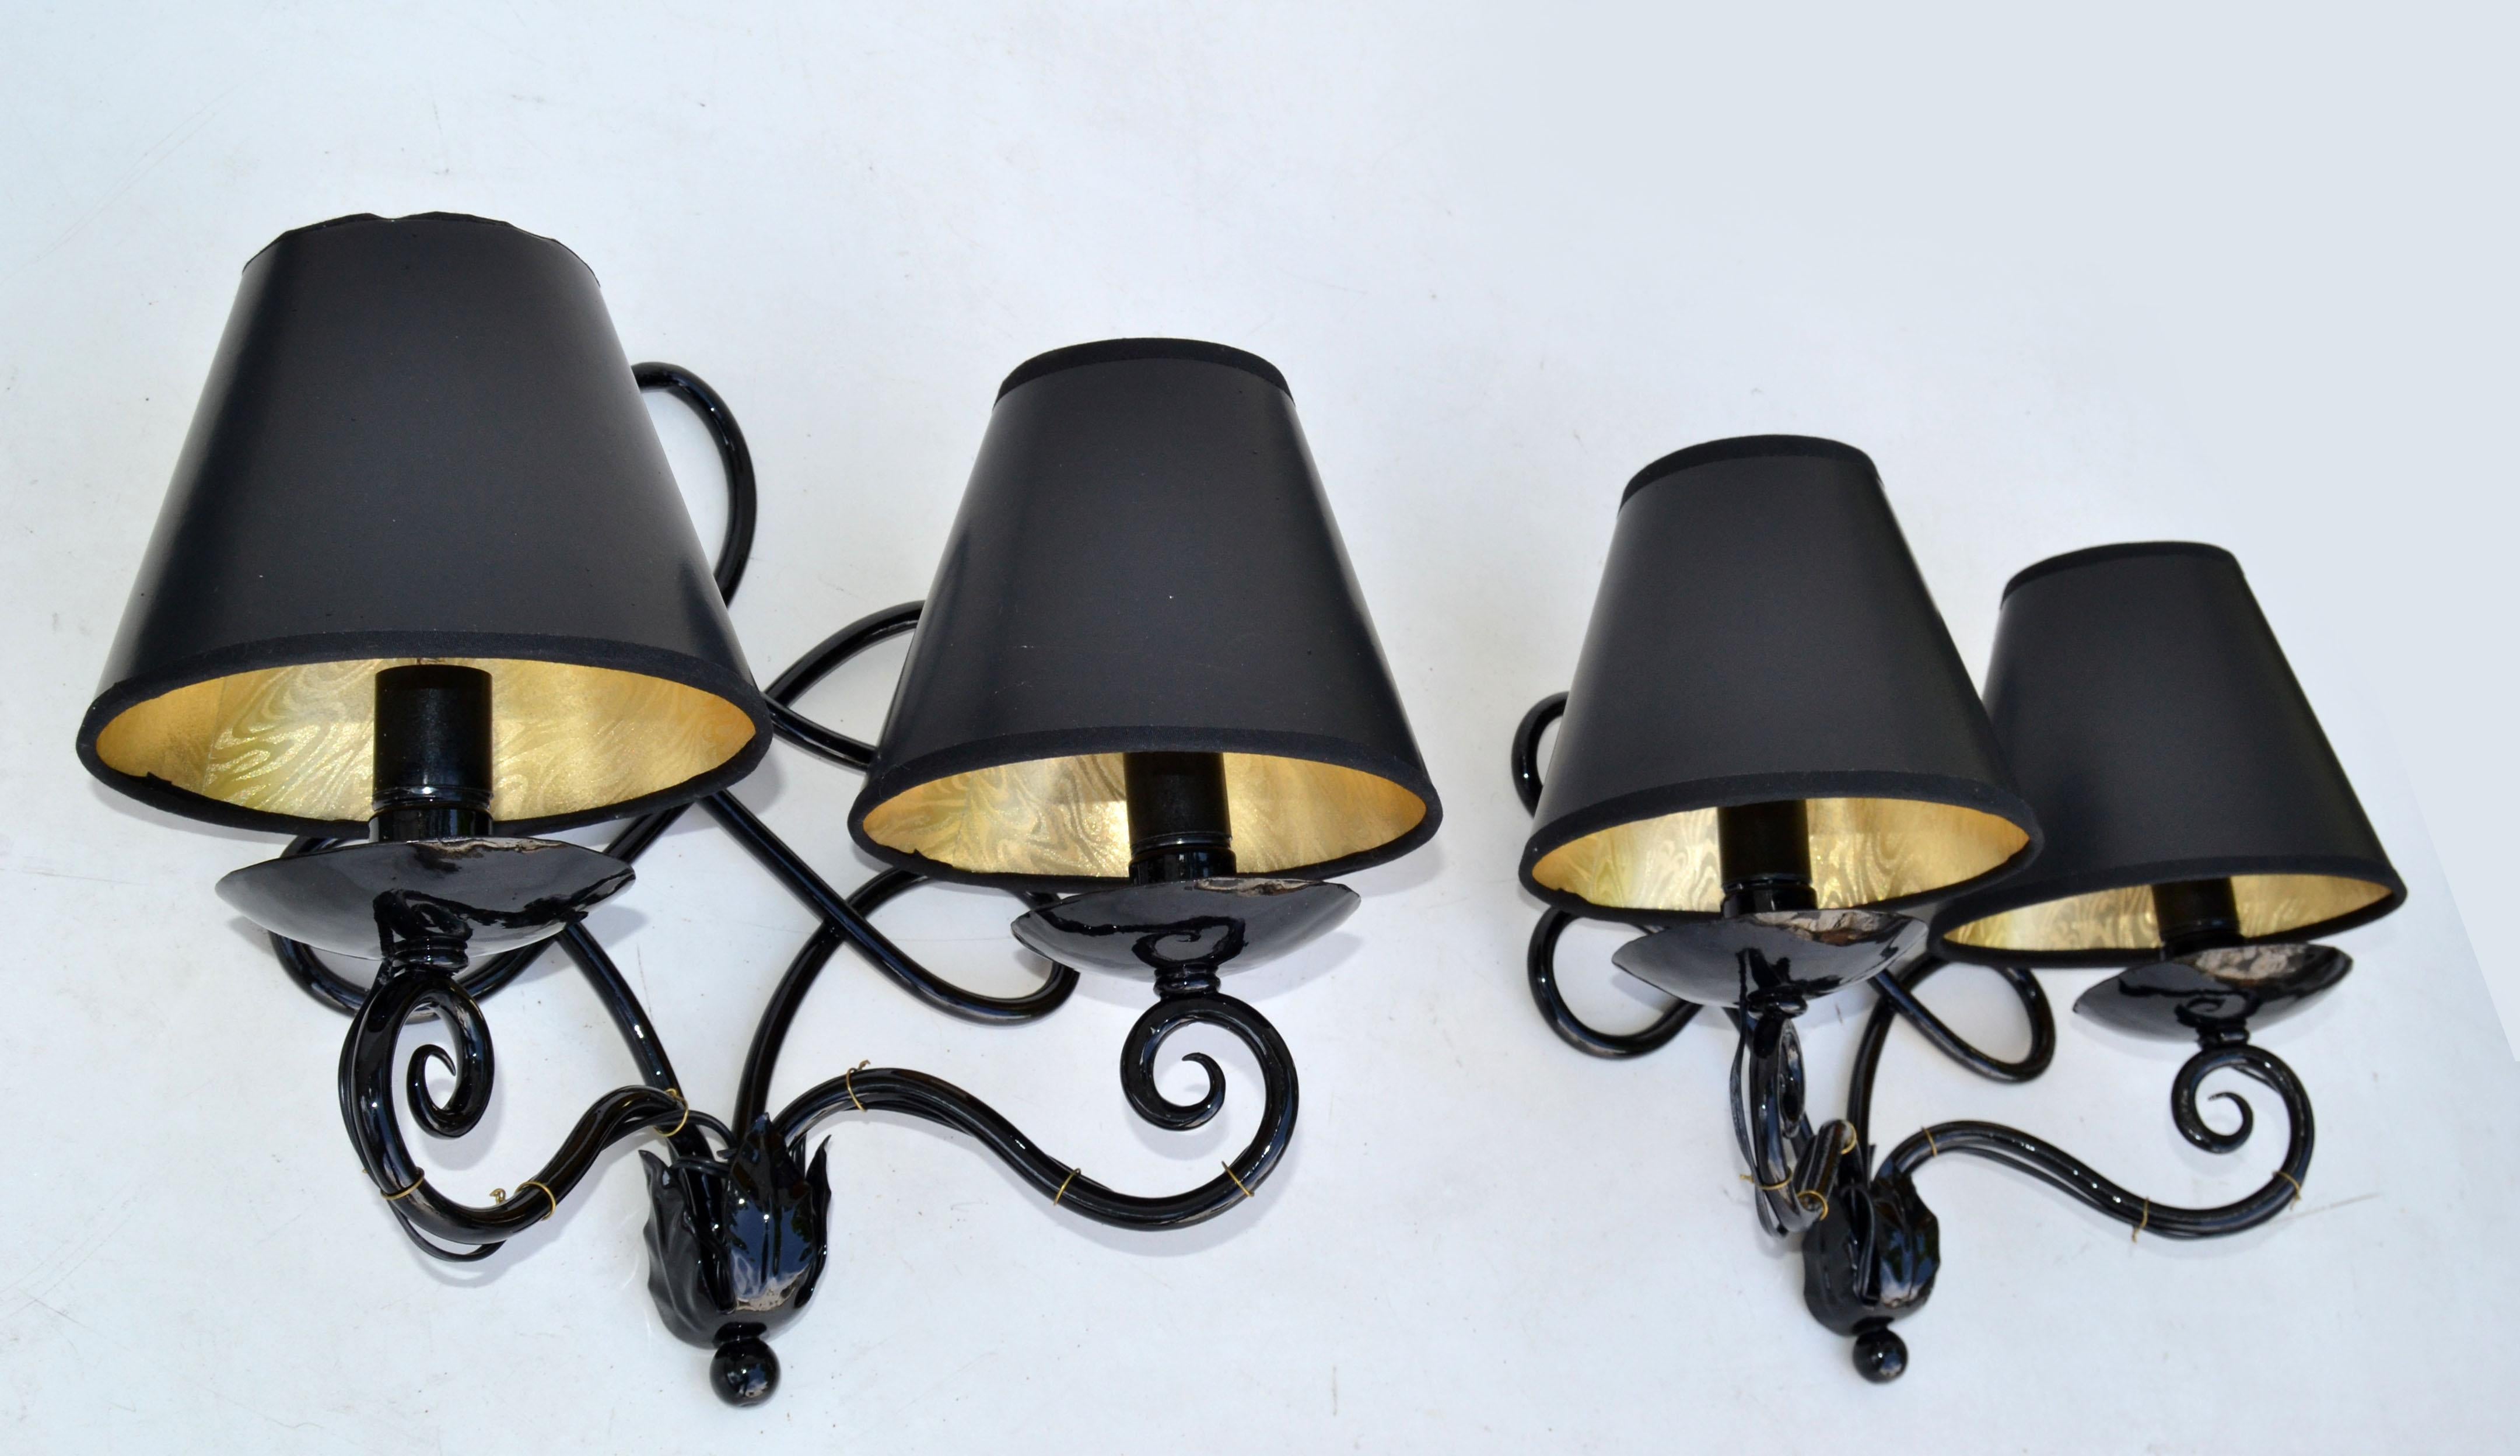 Art Deco Pair of Wrought Iron 2 Light Sconces, Wall Lamps powder-coated in Black Gloss Finish.
Made in France circa 1940.
US Rewiring and each Sconces takes 2 candelabra Light Bulbs with max. 40 watts.
Custom made Junction Box Back Plate